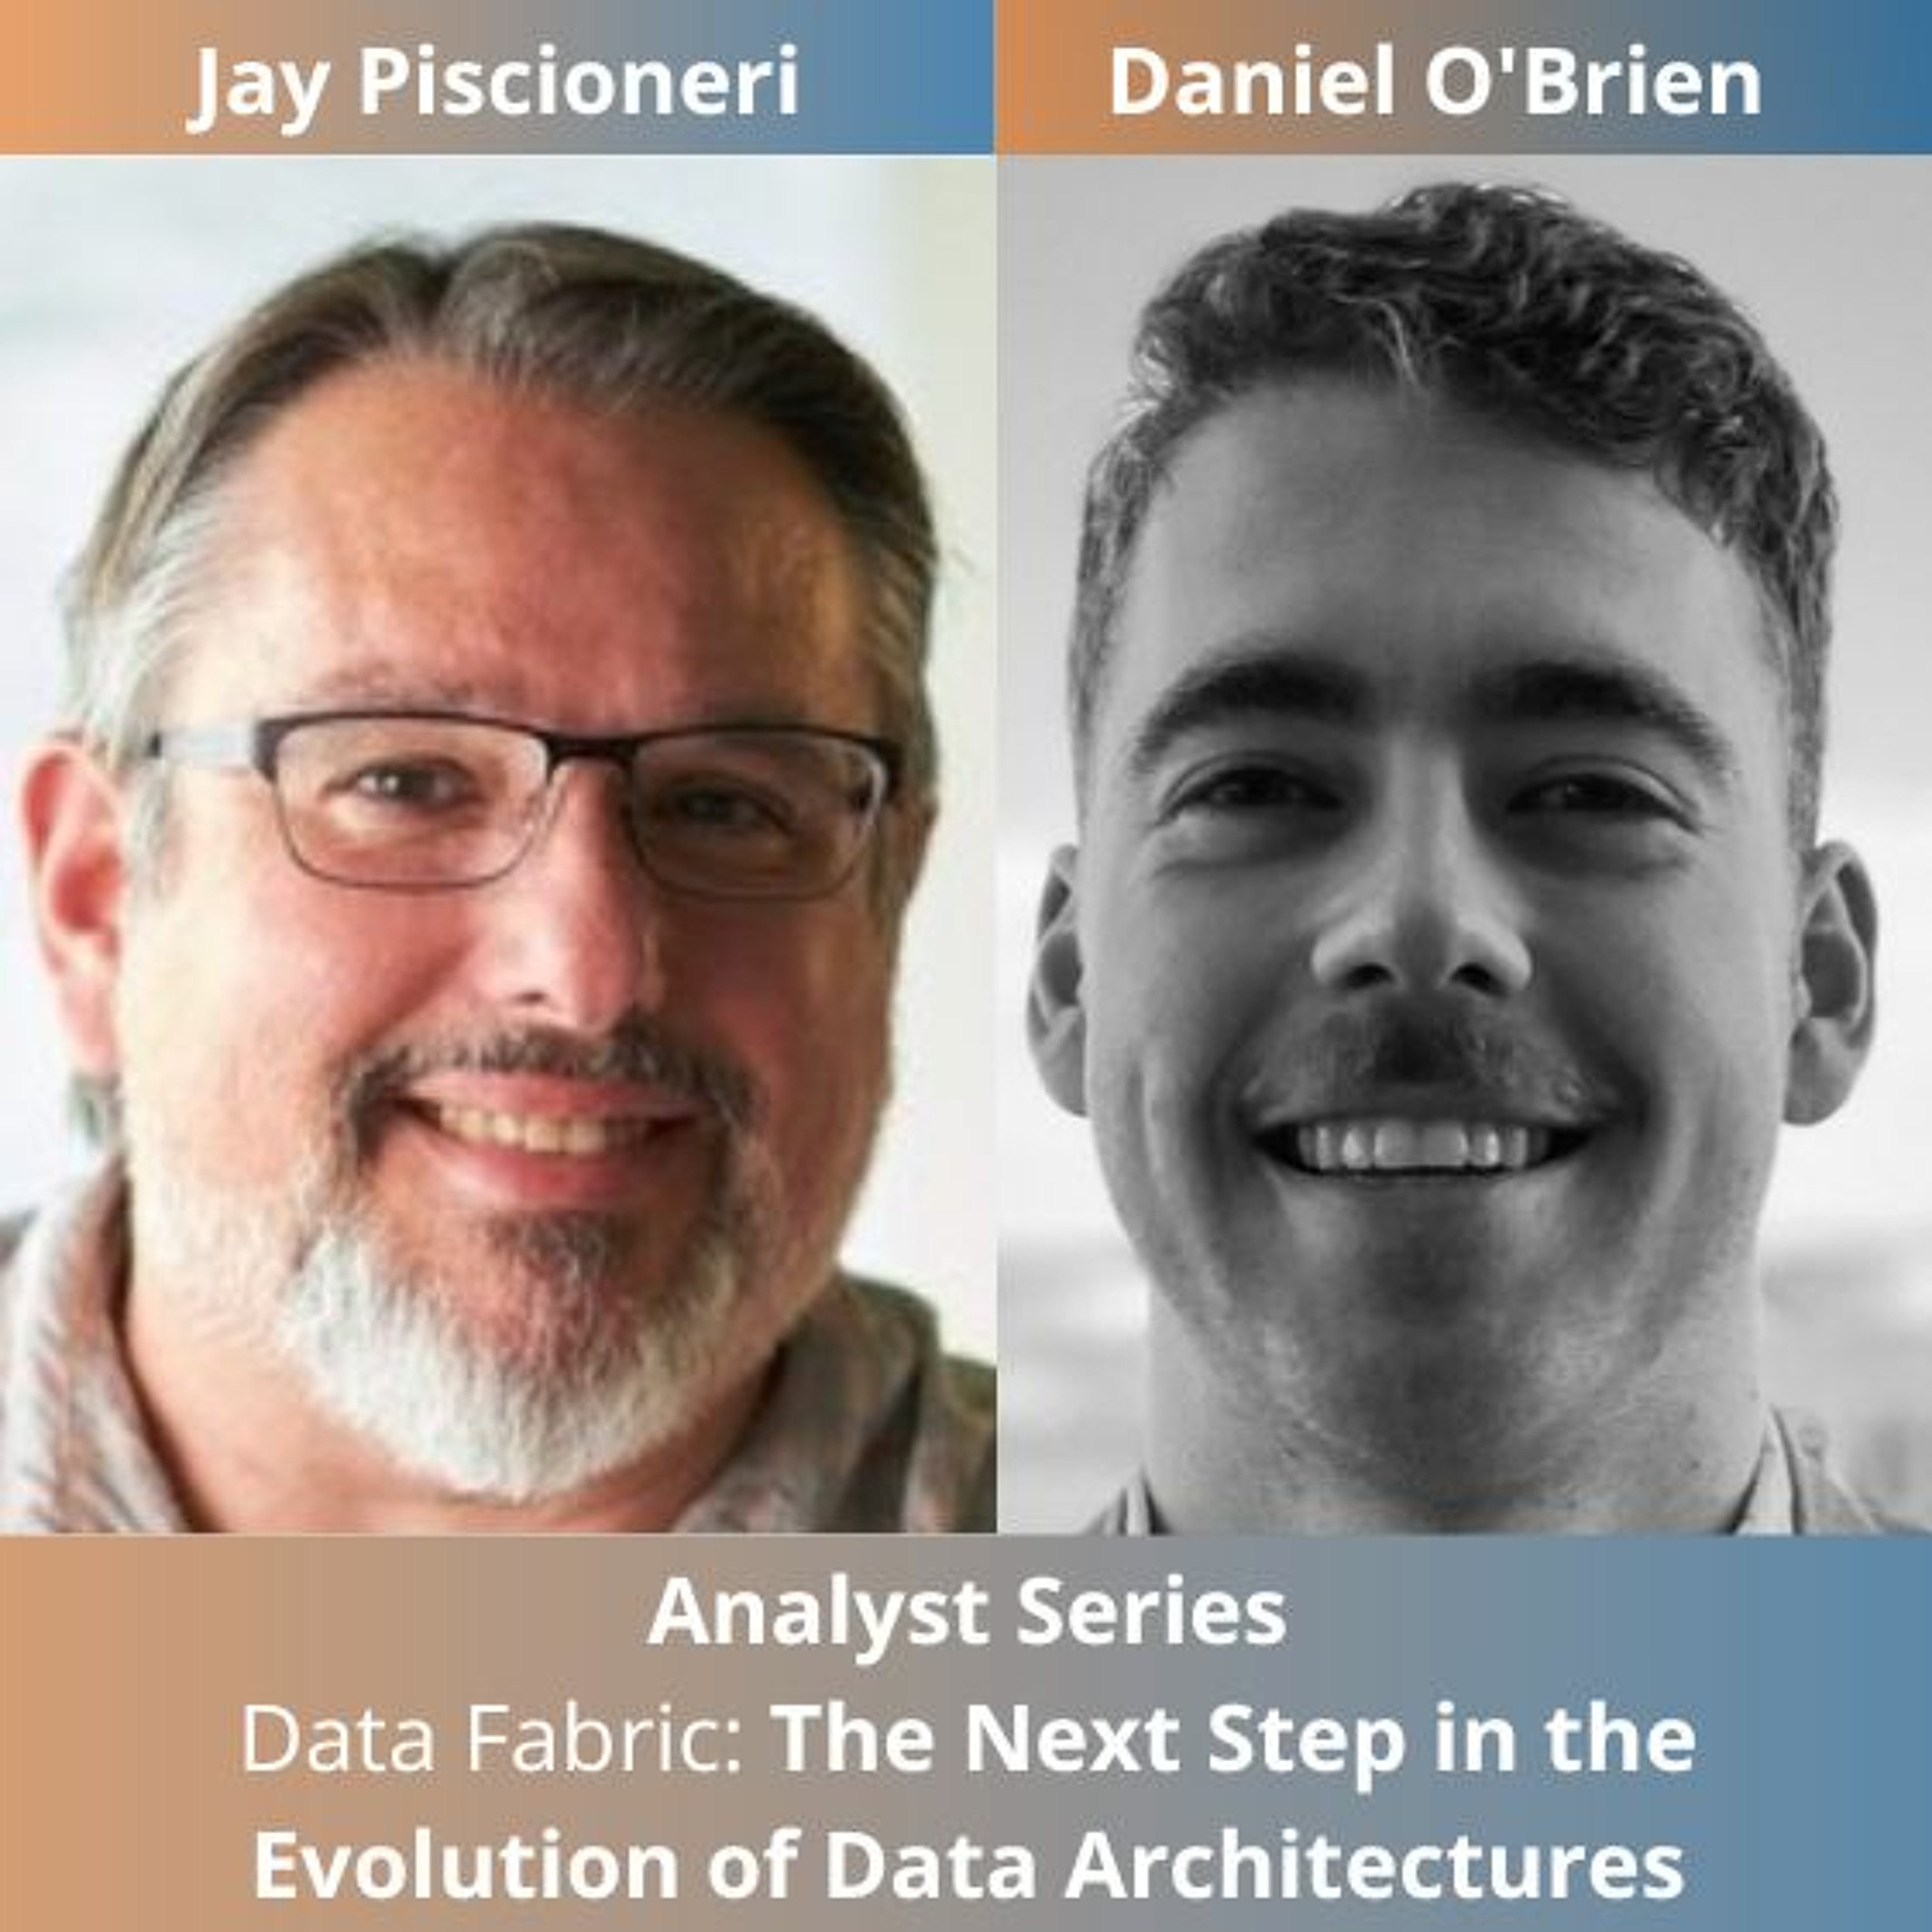 Analyst Series - Data Fabric: The Next Step in the Evolution of Data Architectures